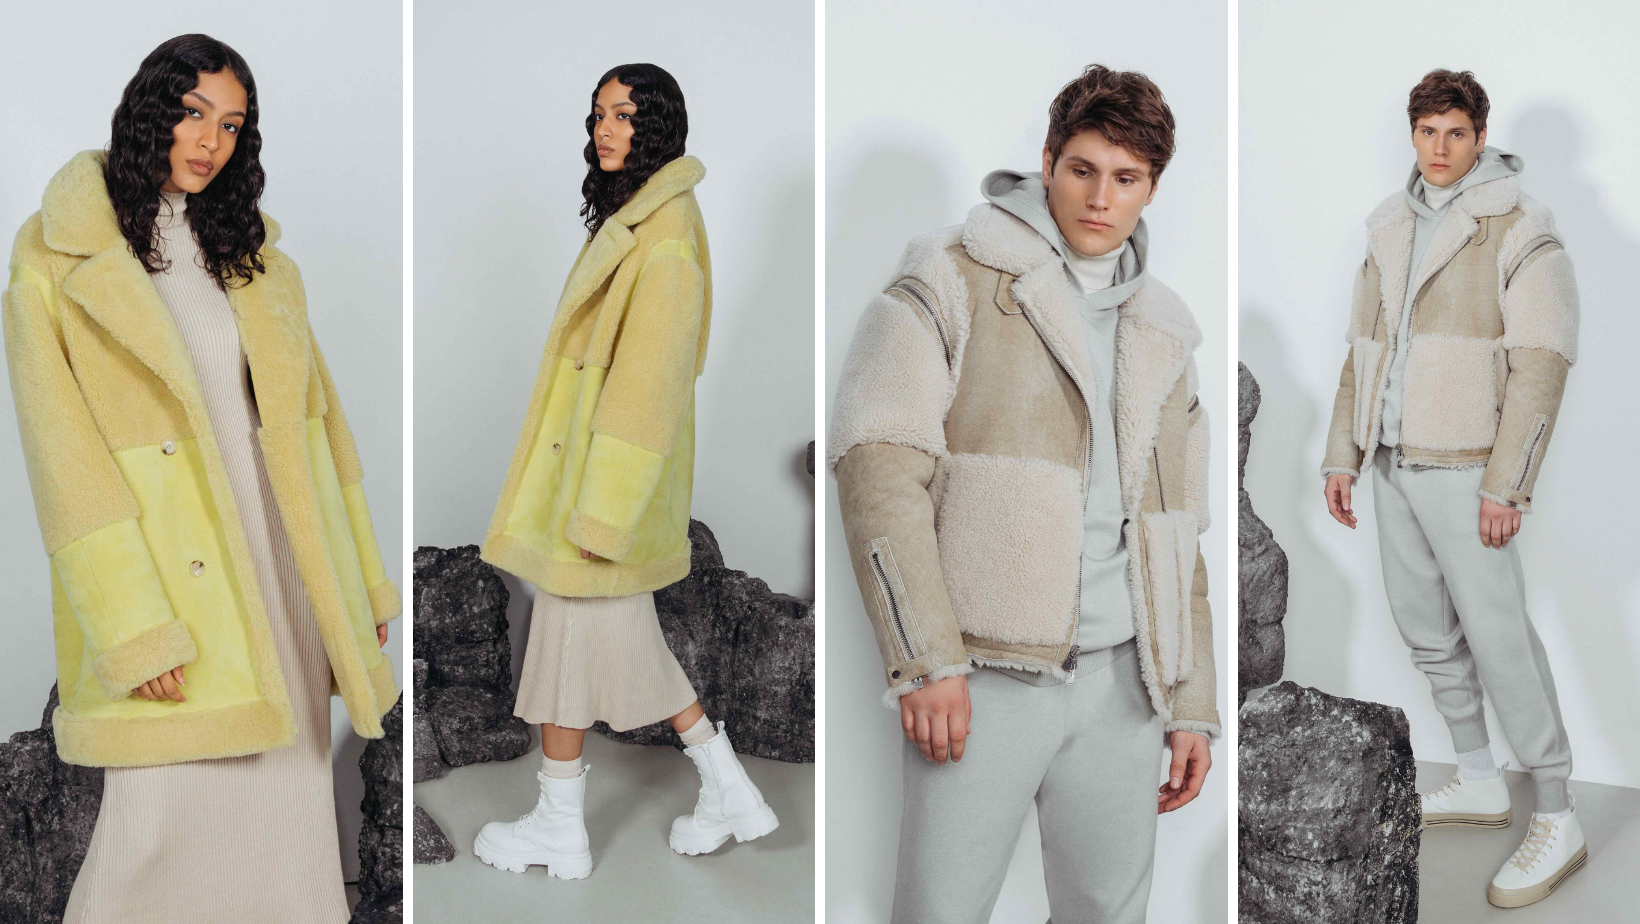 From left to right; Urban: CANARY NAPPA CURLY. Shearling. Reversible. Oversized loose fitted style. Relaxed shoulder. Deep armhole and wide sleeves. Straight cut through torso. 33 in. Wolfe: CEMENT VINTAGE CURLY SUEDE. Shearling. Fits true to size, Fits comfortably across the shoulders, Tapered fit through the torso, Collar with buckles, Interior zipper pocket, 26 in.  